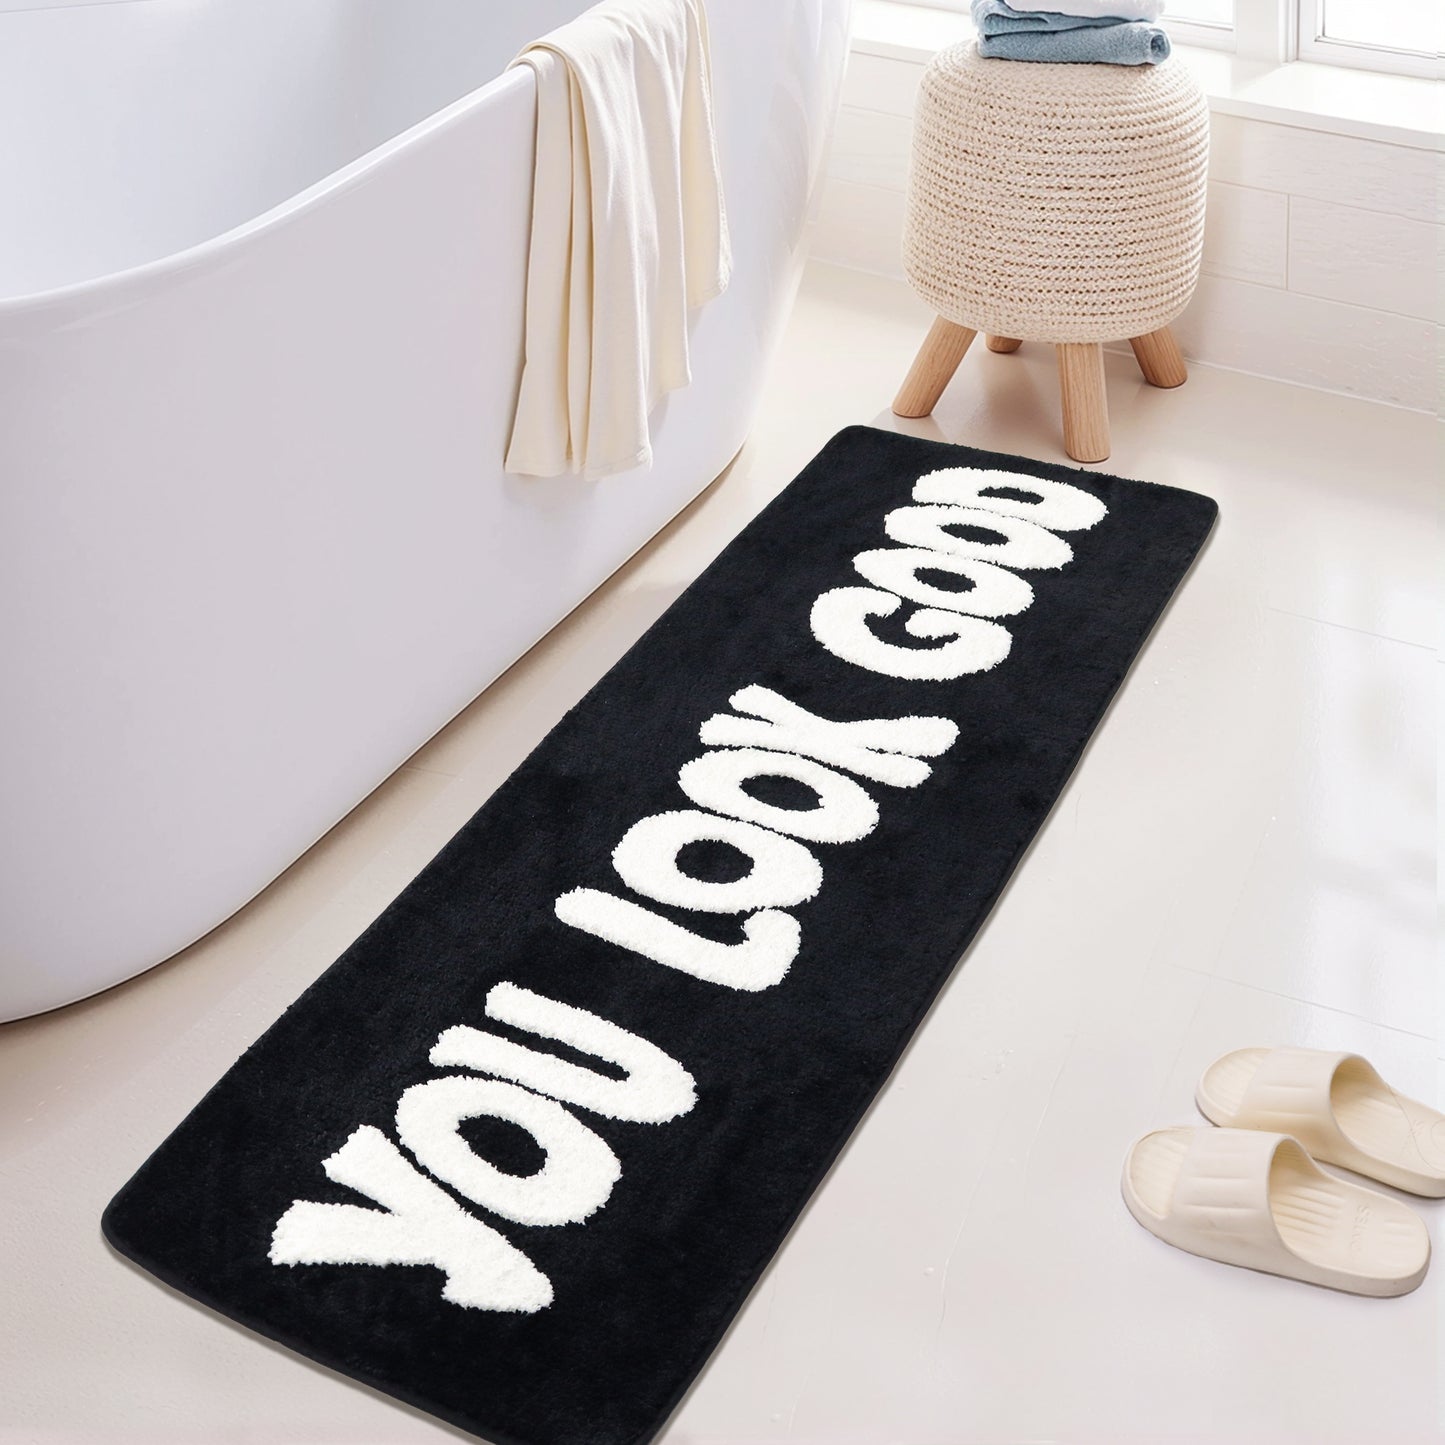 20"x60" "You Look Good" Runner Rug - Non-Slip Long Bath Mat - Soft and Absorbent Chic Bathroom Decor for Bathtub, , Laundry Room,Bedroom, and Shower